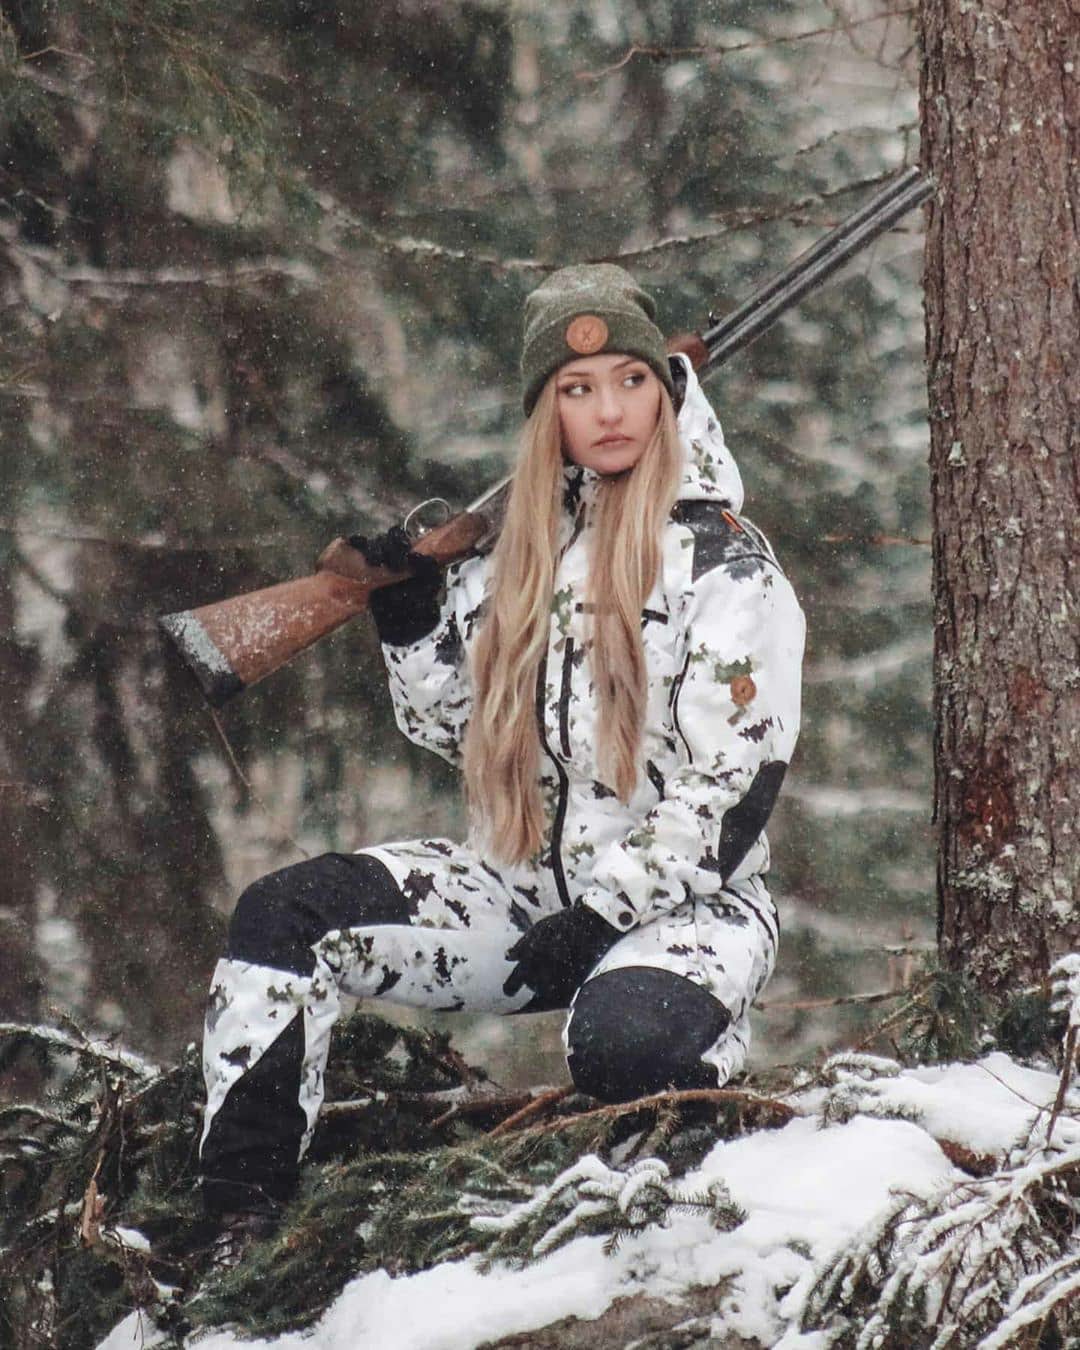 A woman hunting wearing a Naruska snow camo hunting suit